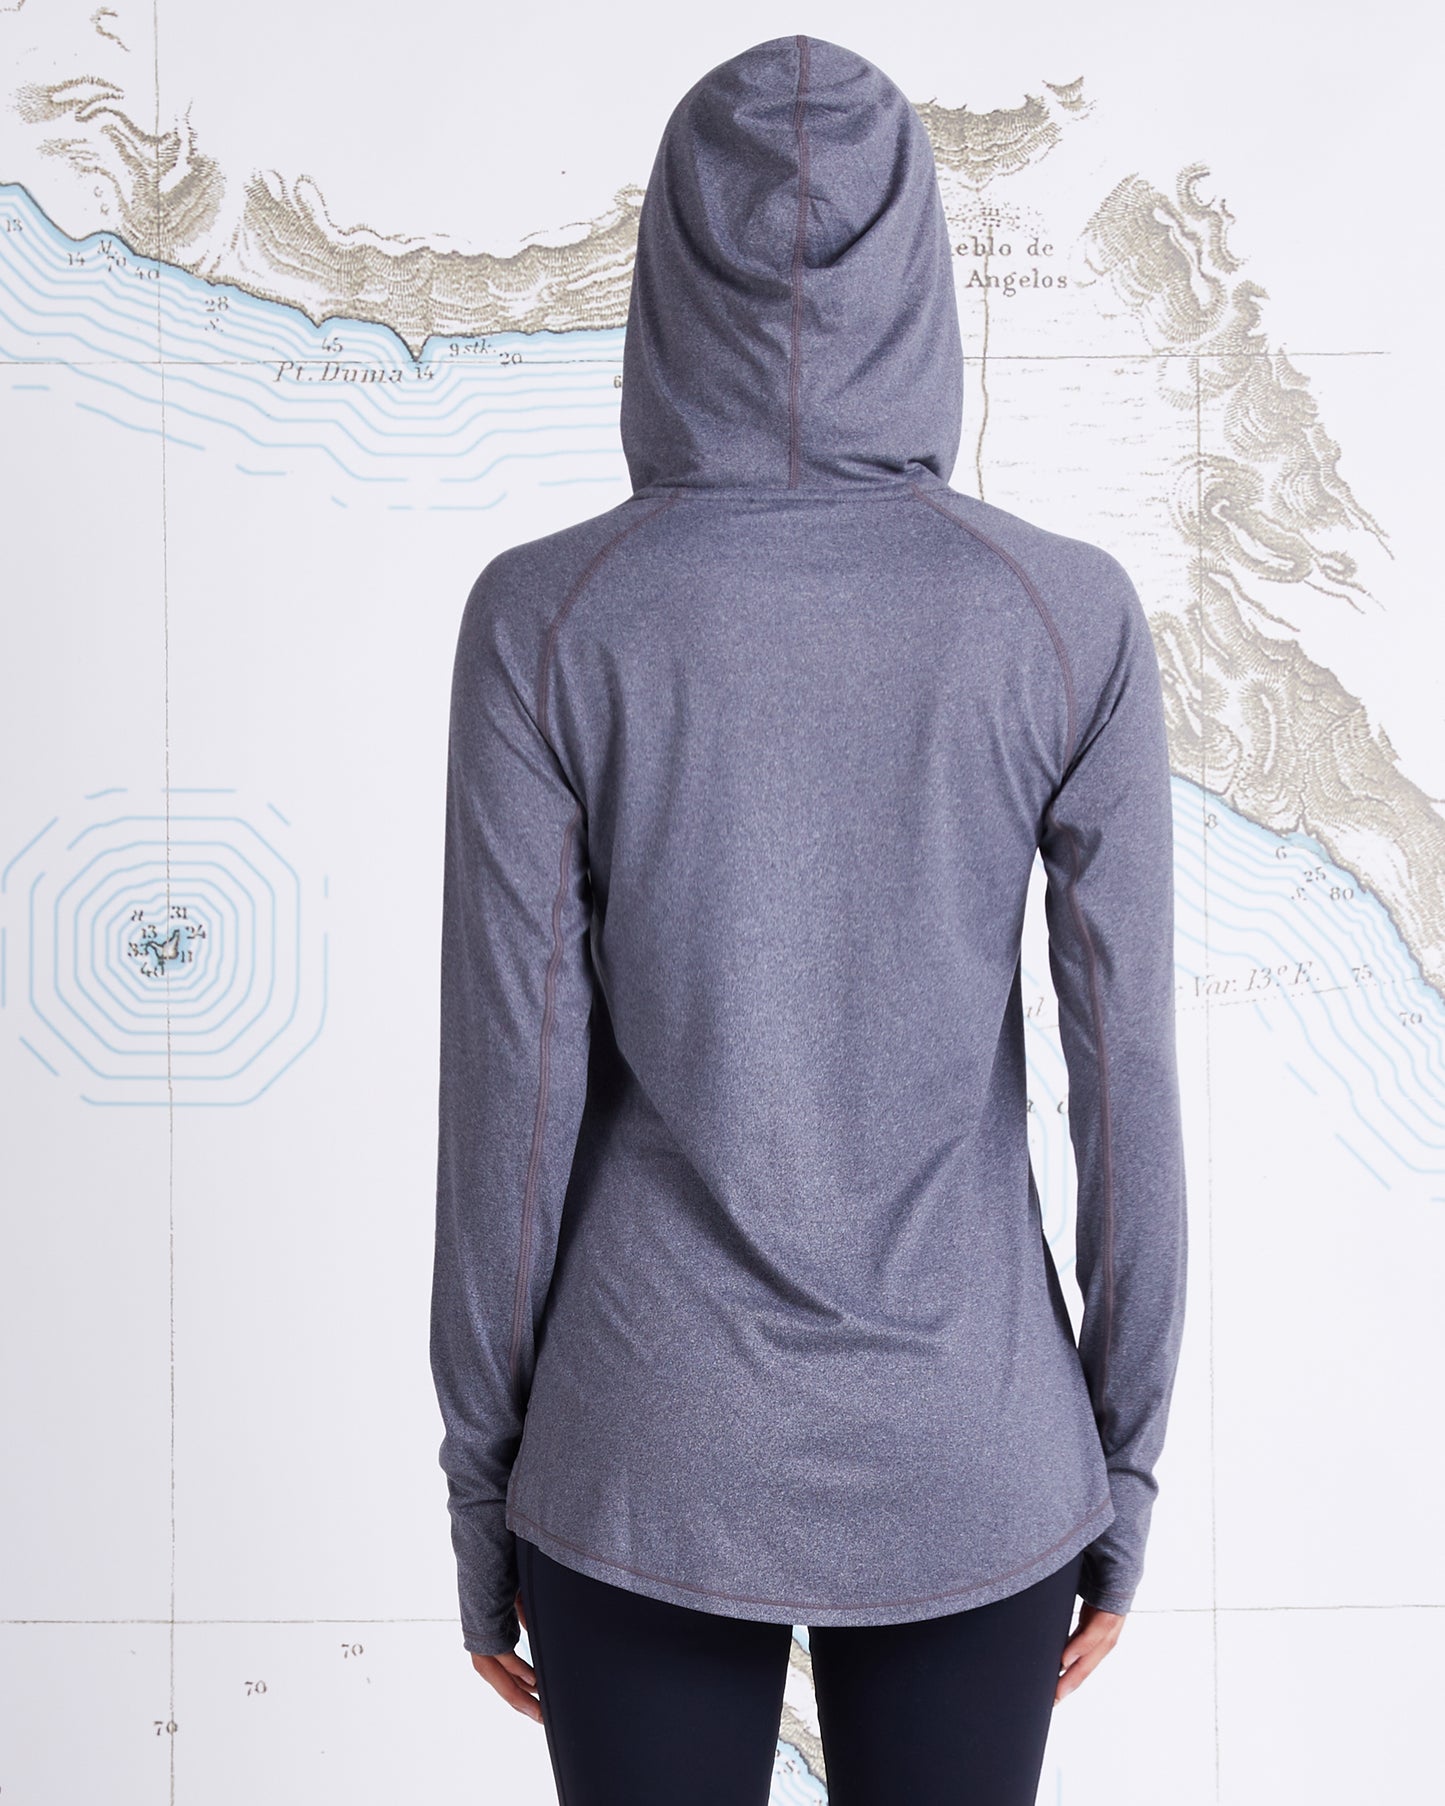 THRILL SEEKERS HOODED SUNSHIRT - Charcoal